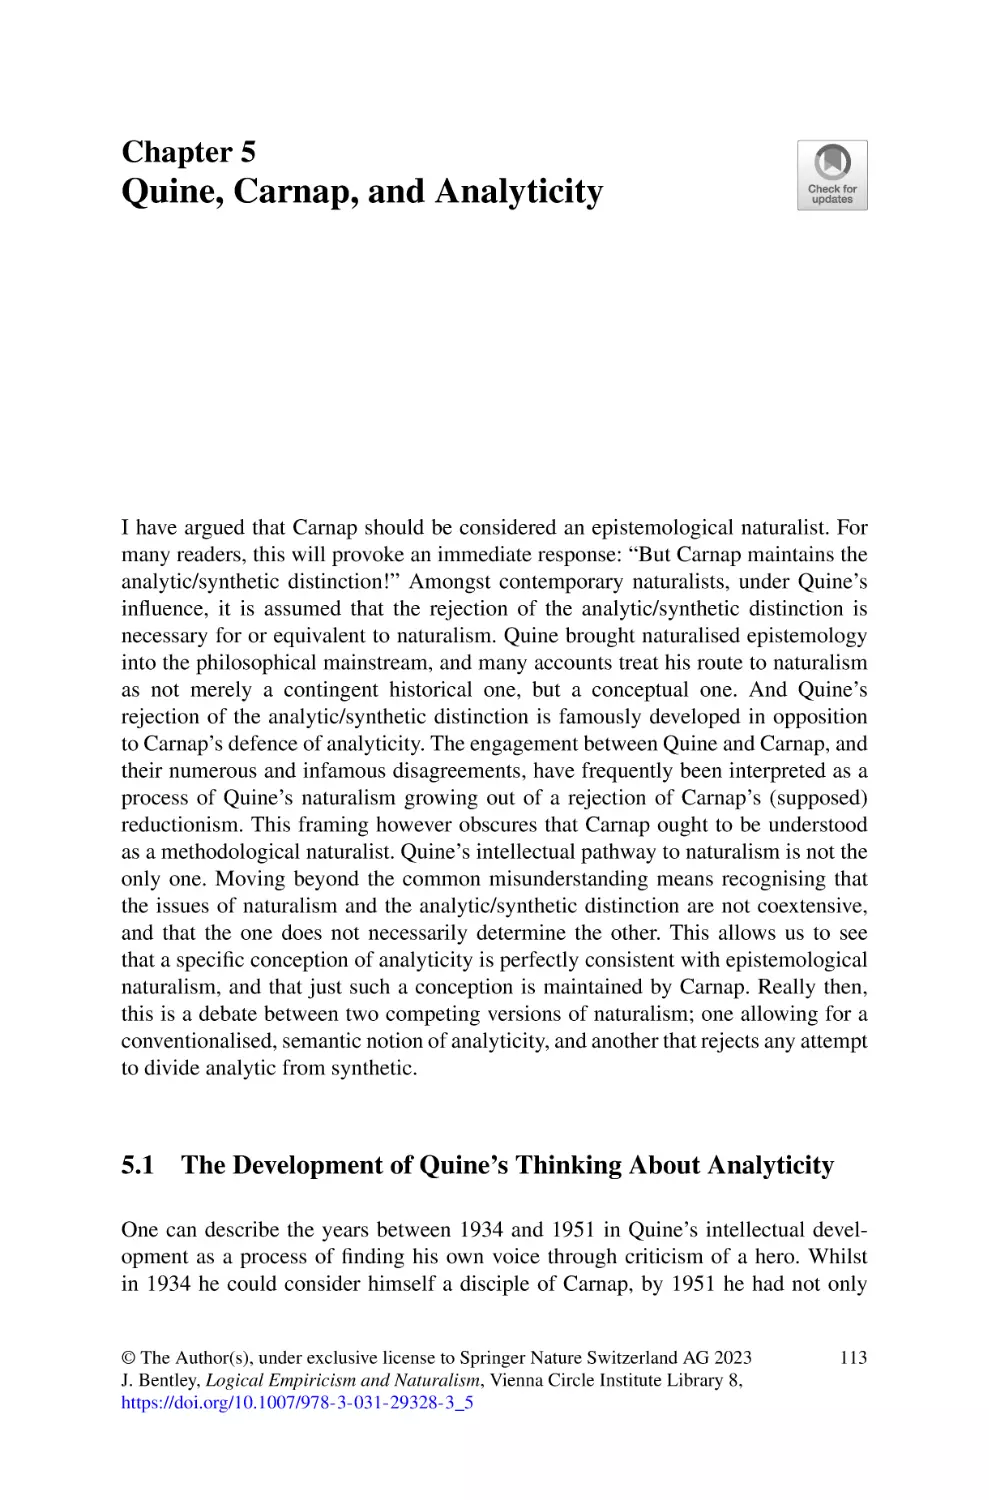 5 Quine, Carnap, and Analyticity
5.1 The Development of Quine's Thinking About Analyticity